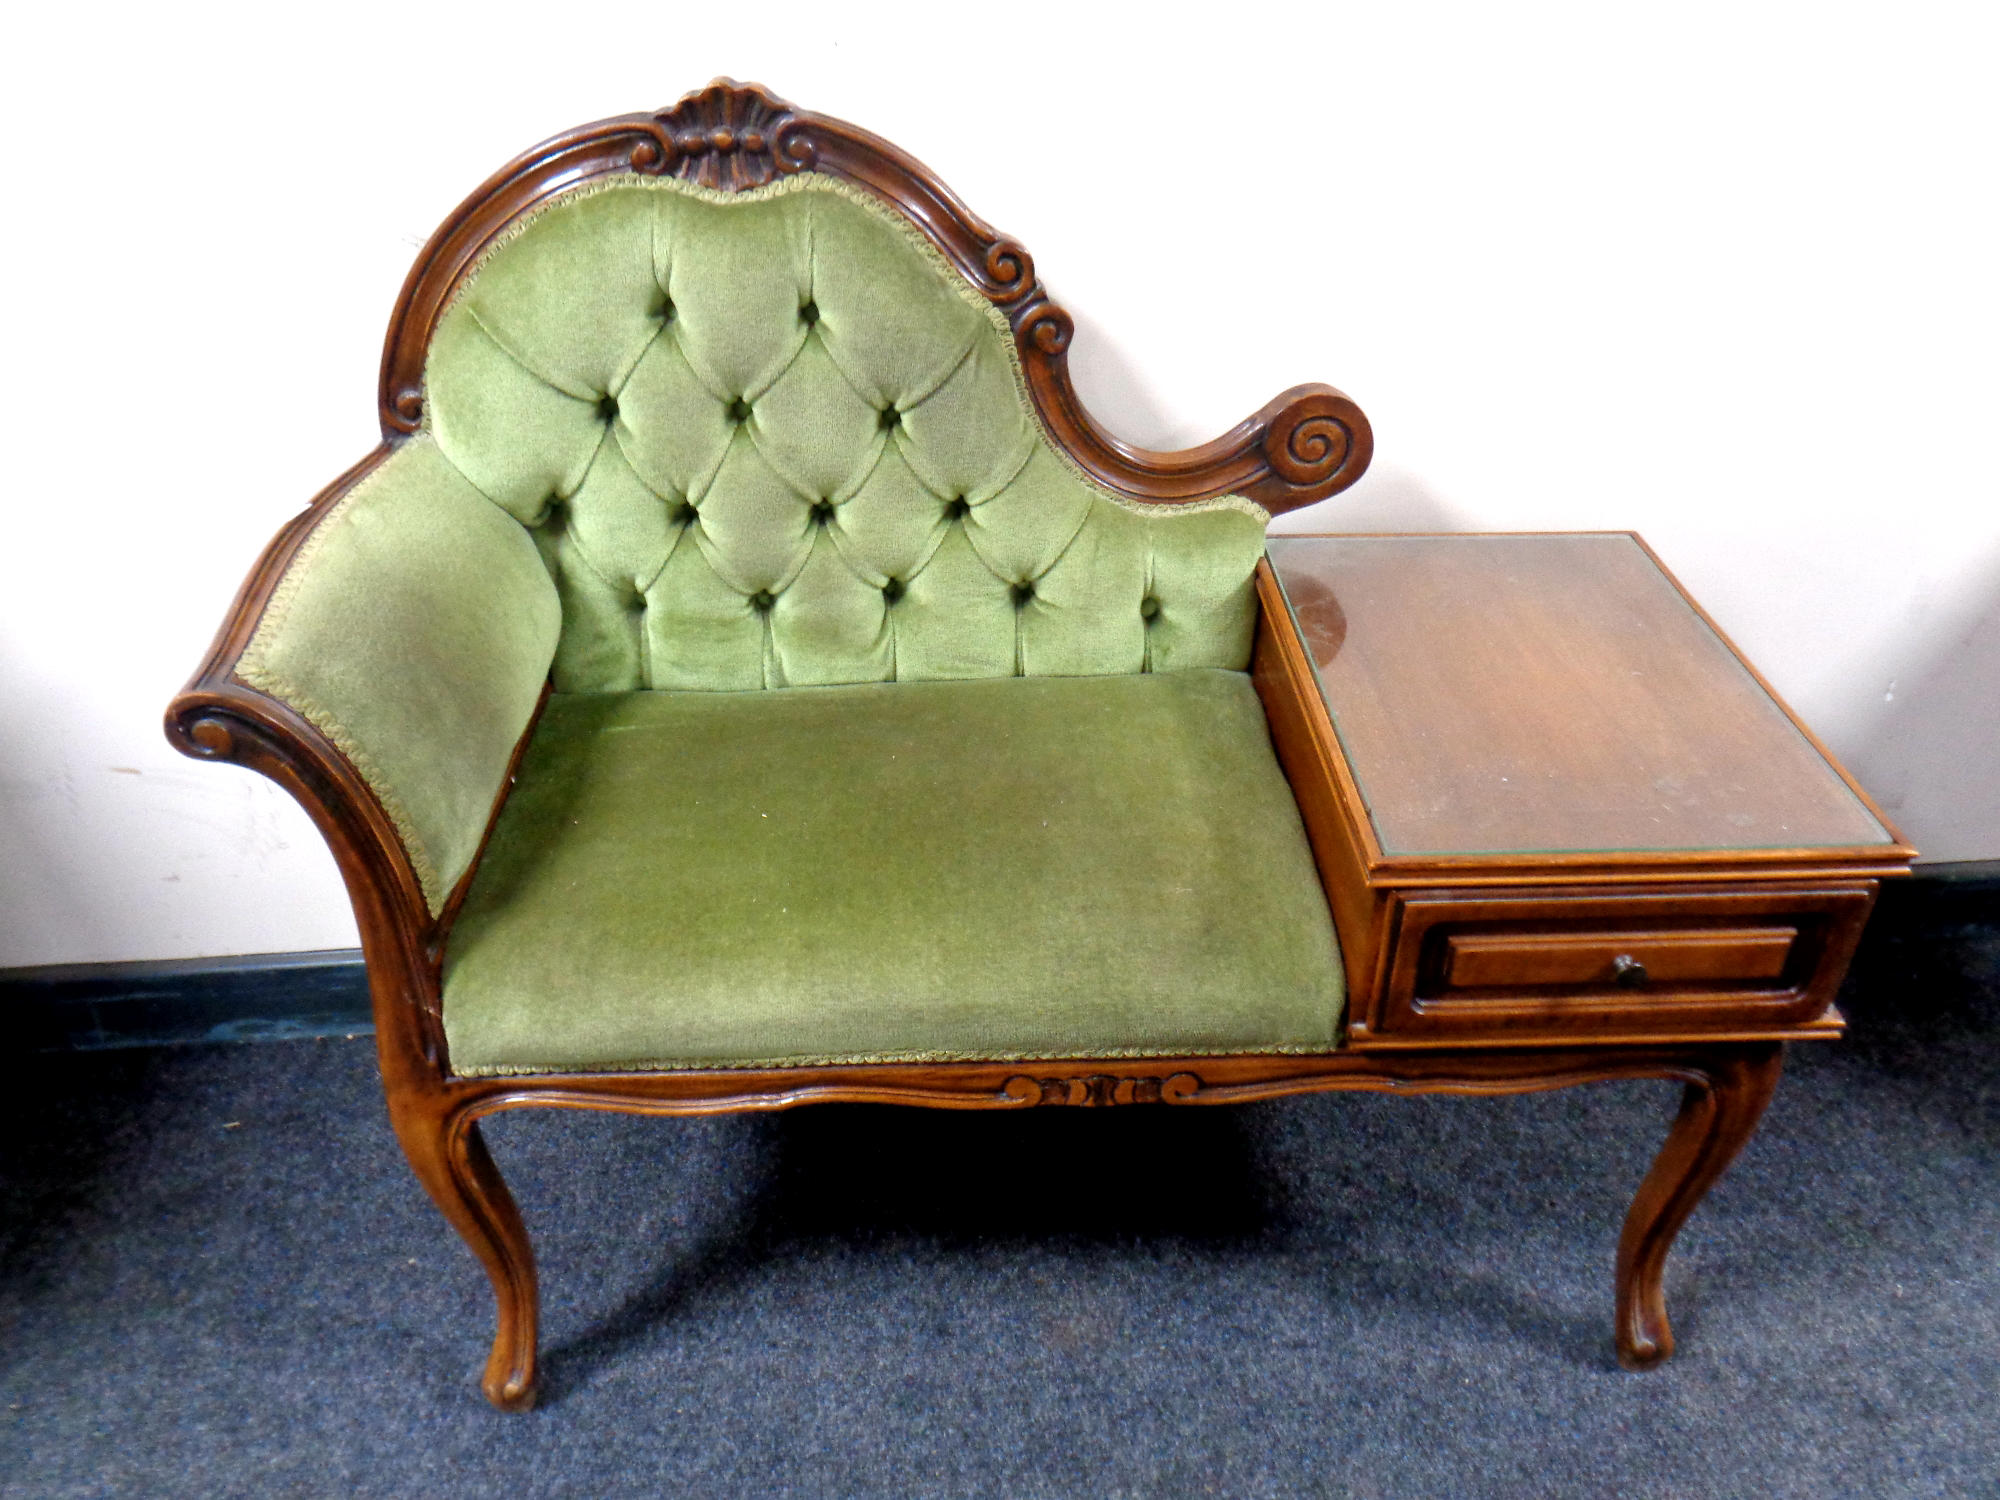 An Italian style telephone table upholstered in a green dralon